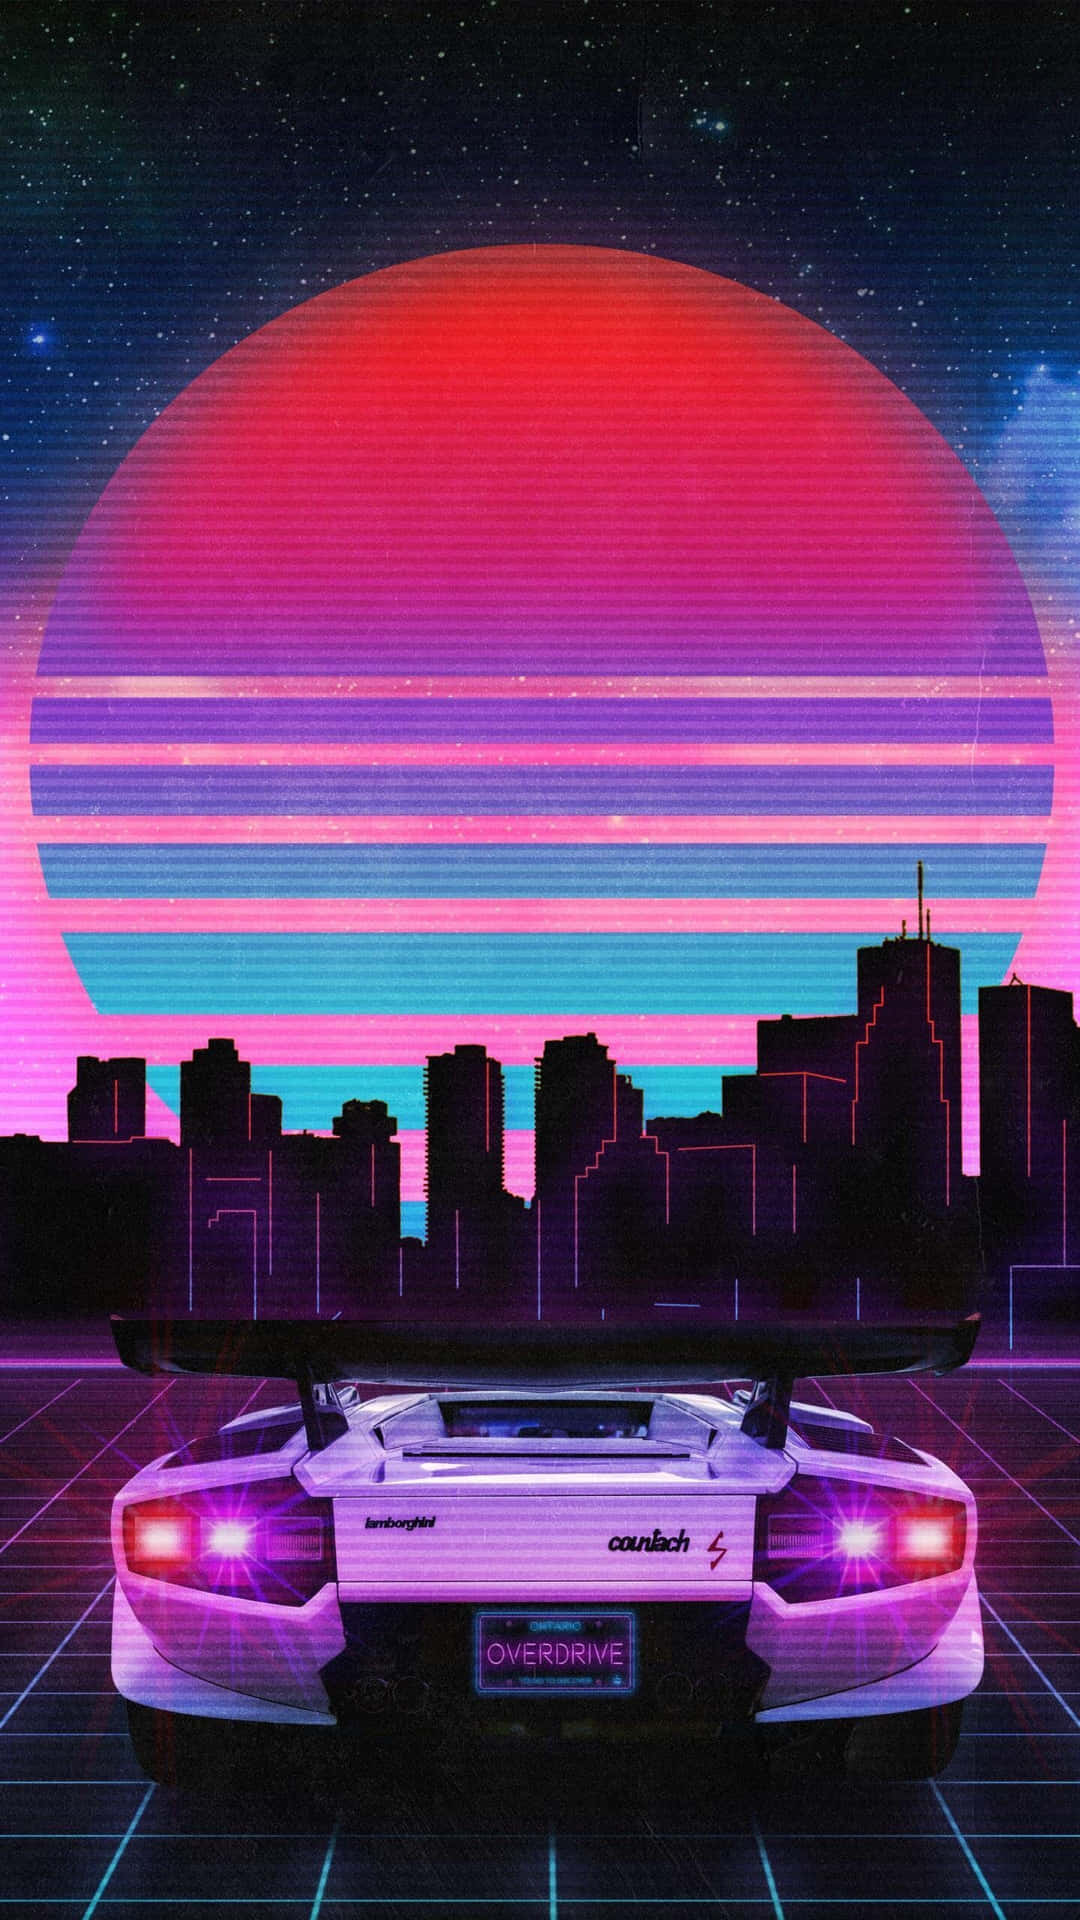 A Car In The City With A Neon Sky